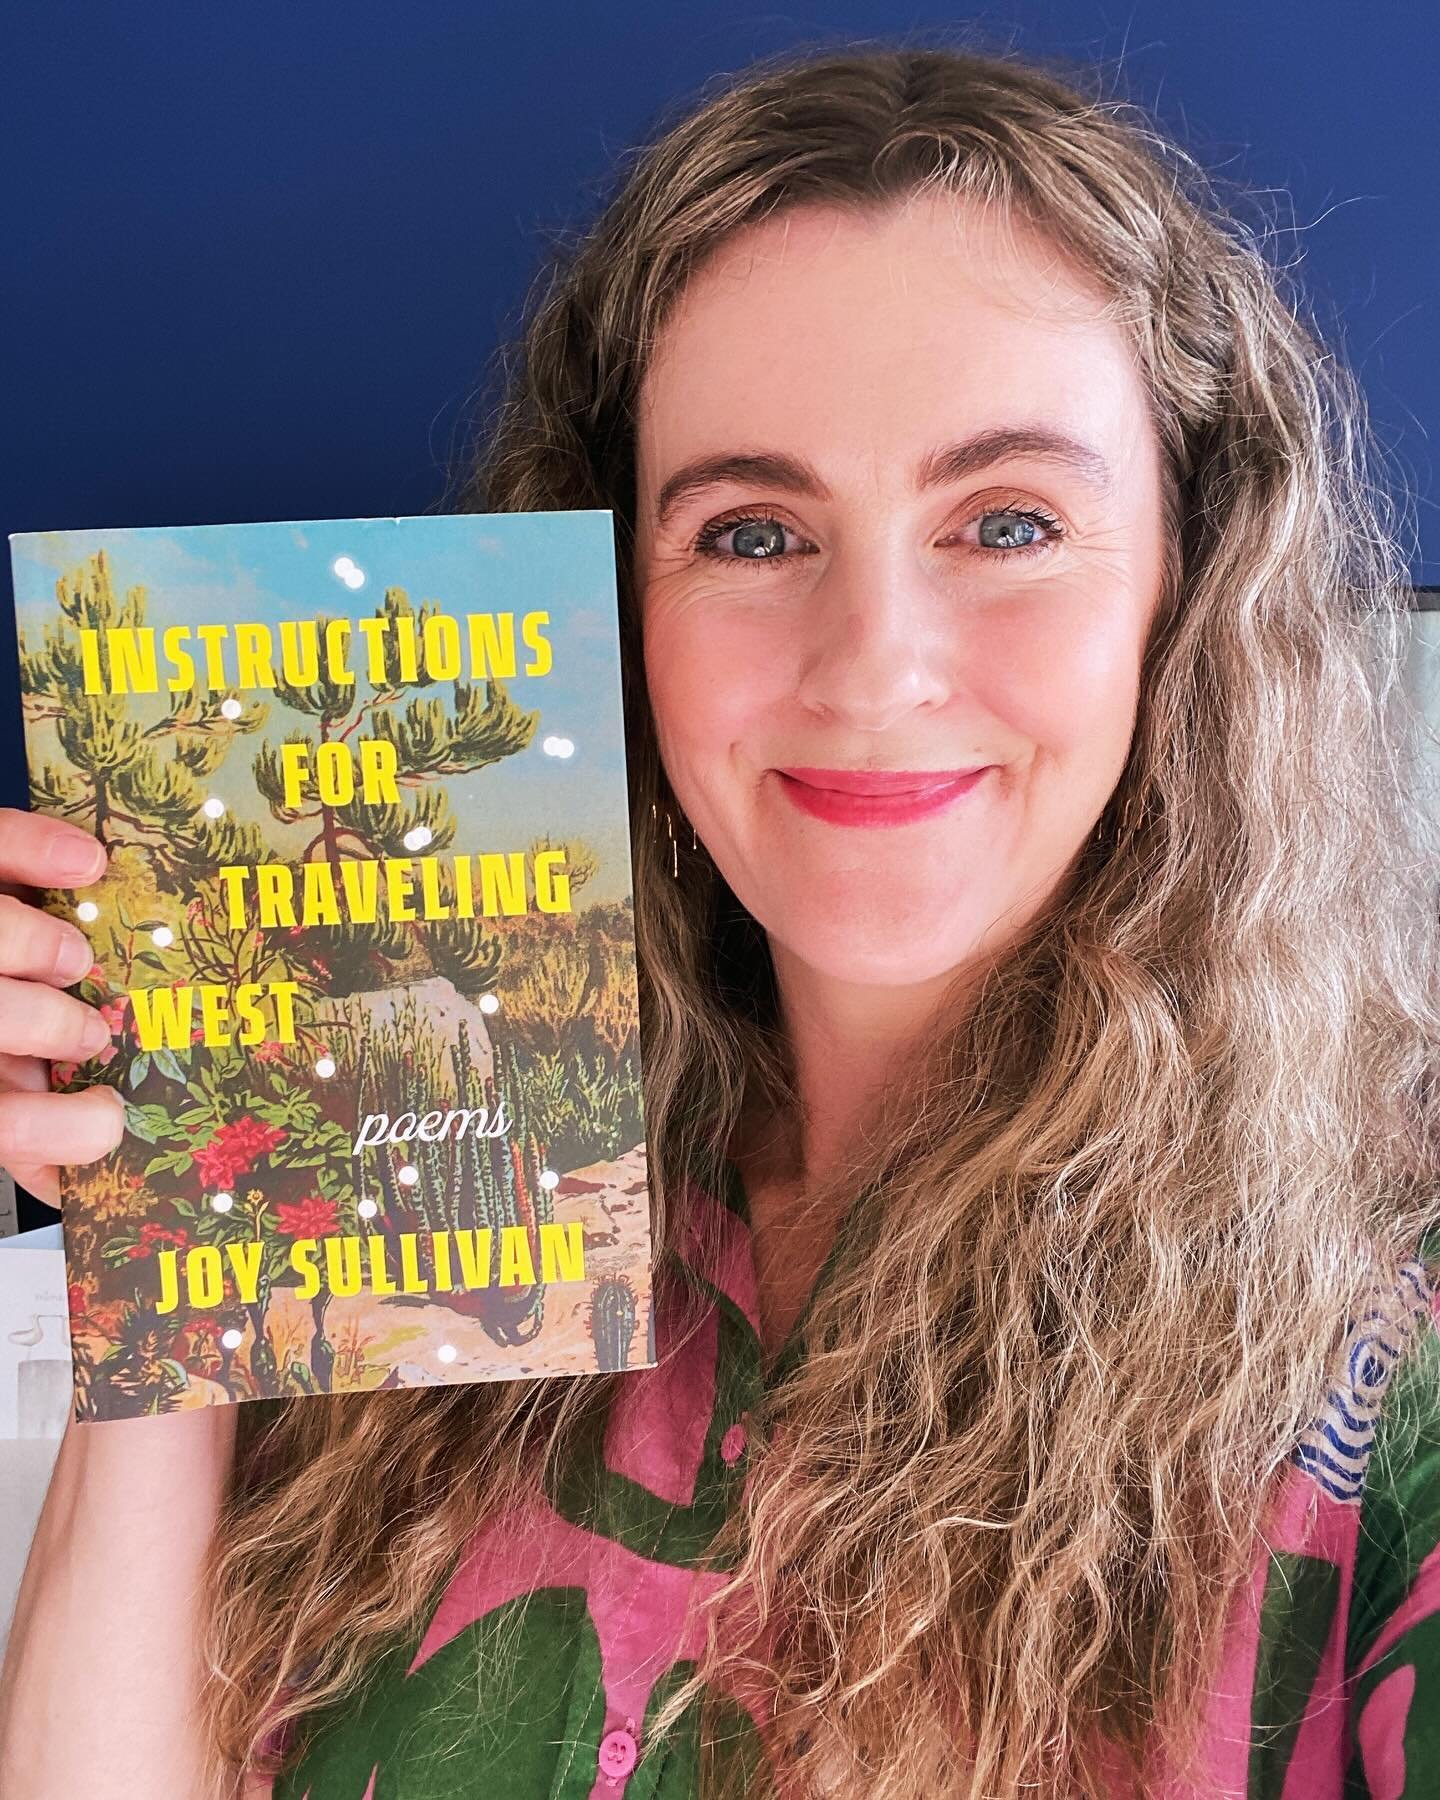 This beautiful book of poetry is yours to treasure. Mid-pandemic, Joy Sullivan left her fianc&eacute;, sold her house, quit her corporate job, and drove west. The poems that flowed from this brave rupture are poignant and powerful, exploring loss, lo